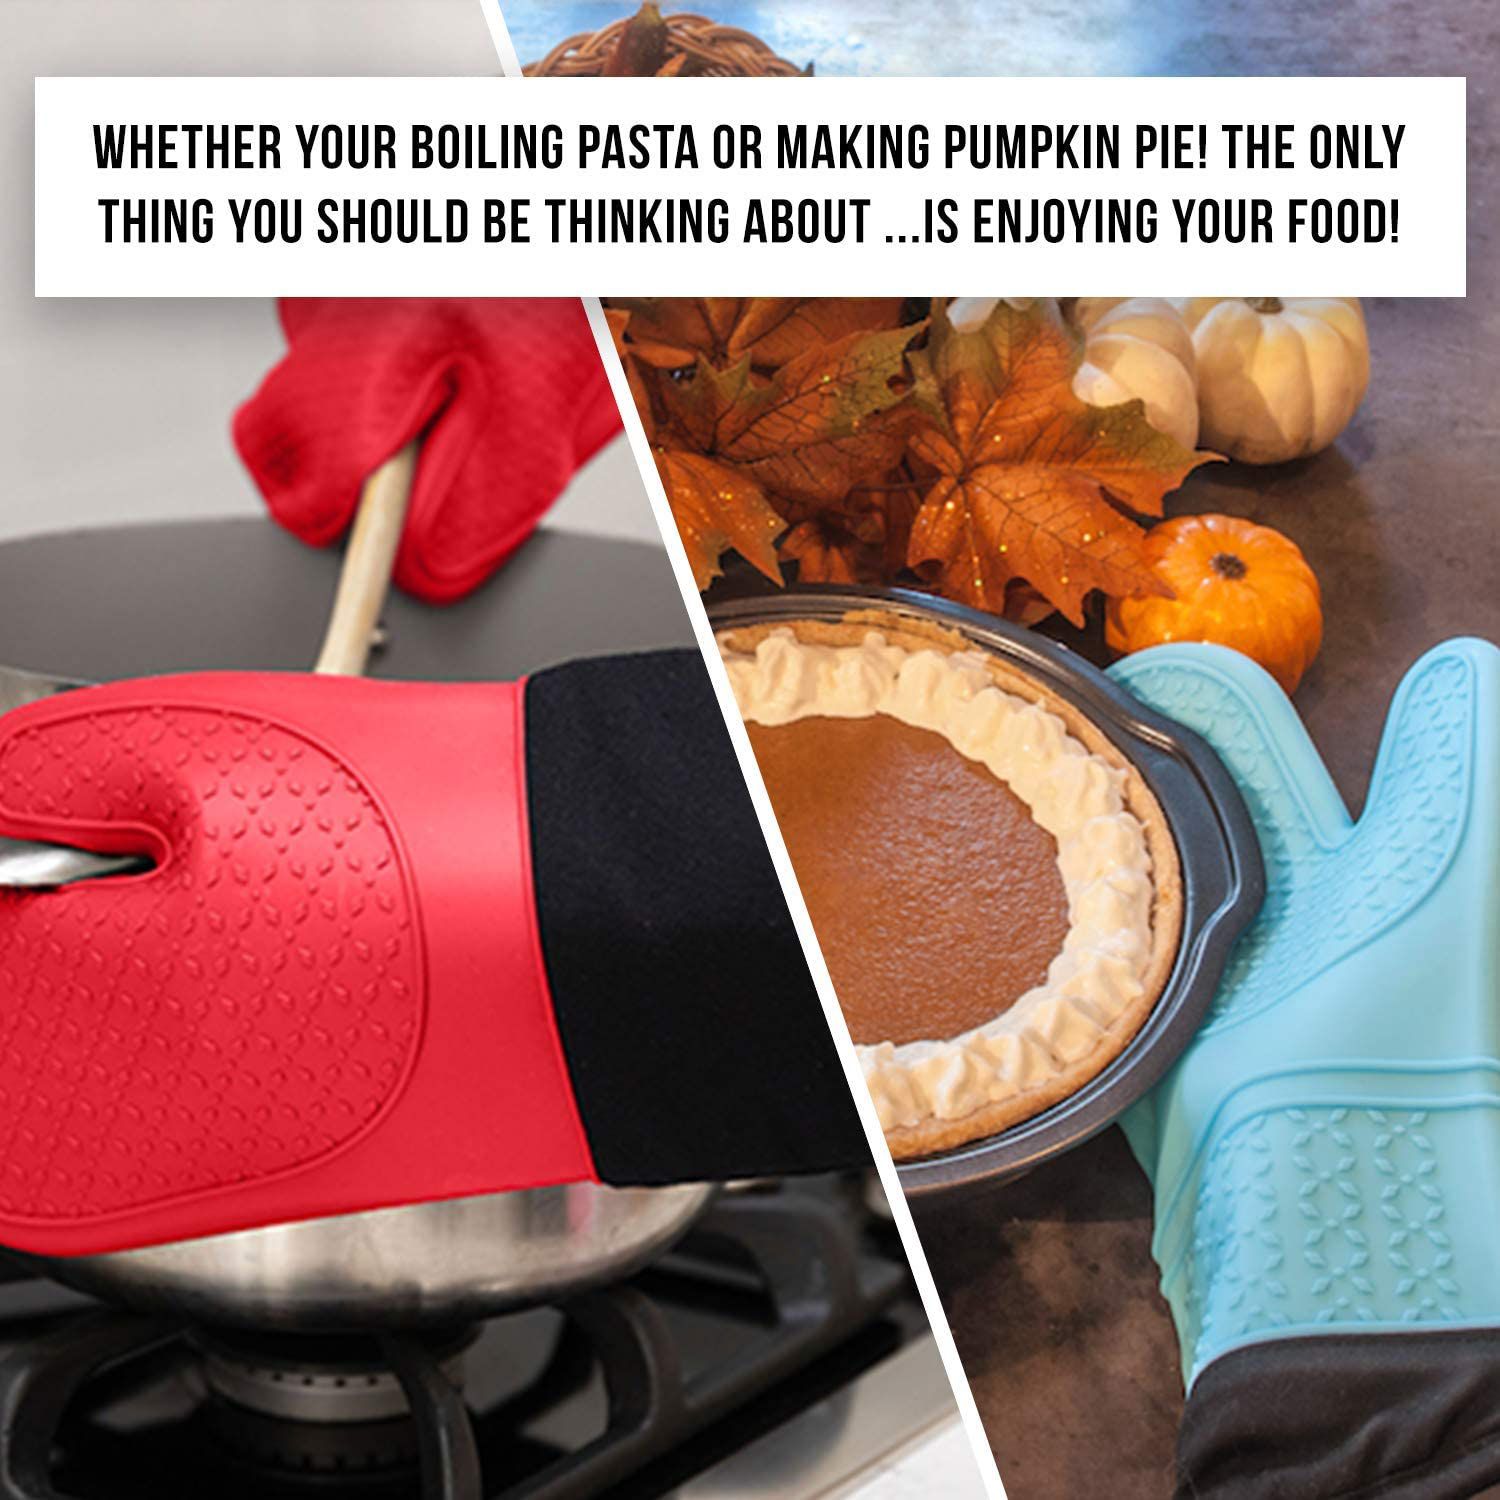 Silicone Oven Mitts Heat Resistant 500 Degrees - 2 Extra Long Silicone Oven Mitt Pot Holders - Food Safe Oven Gloves - BPA Free - Soft Inner Lining -